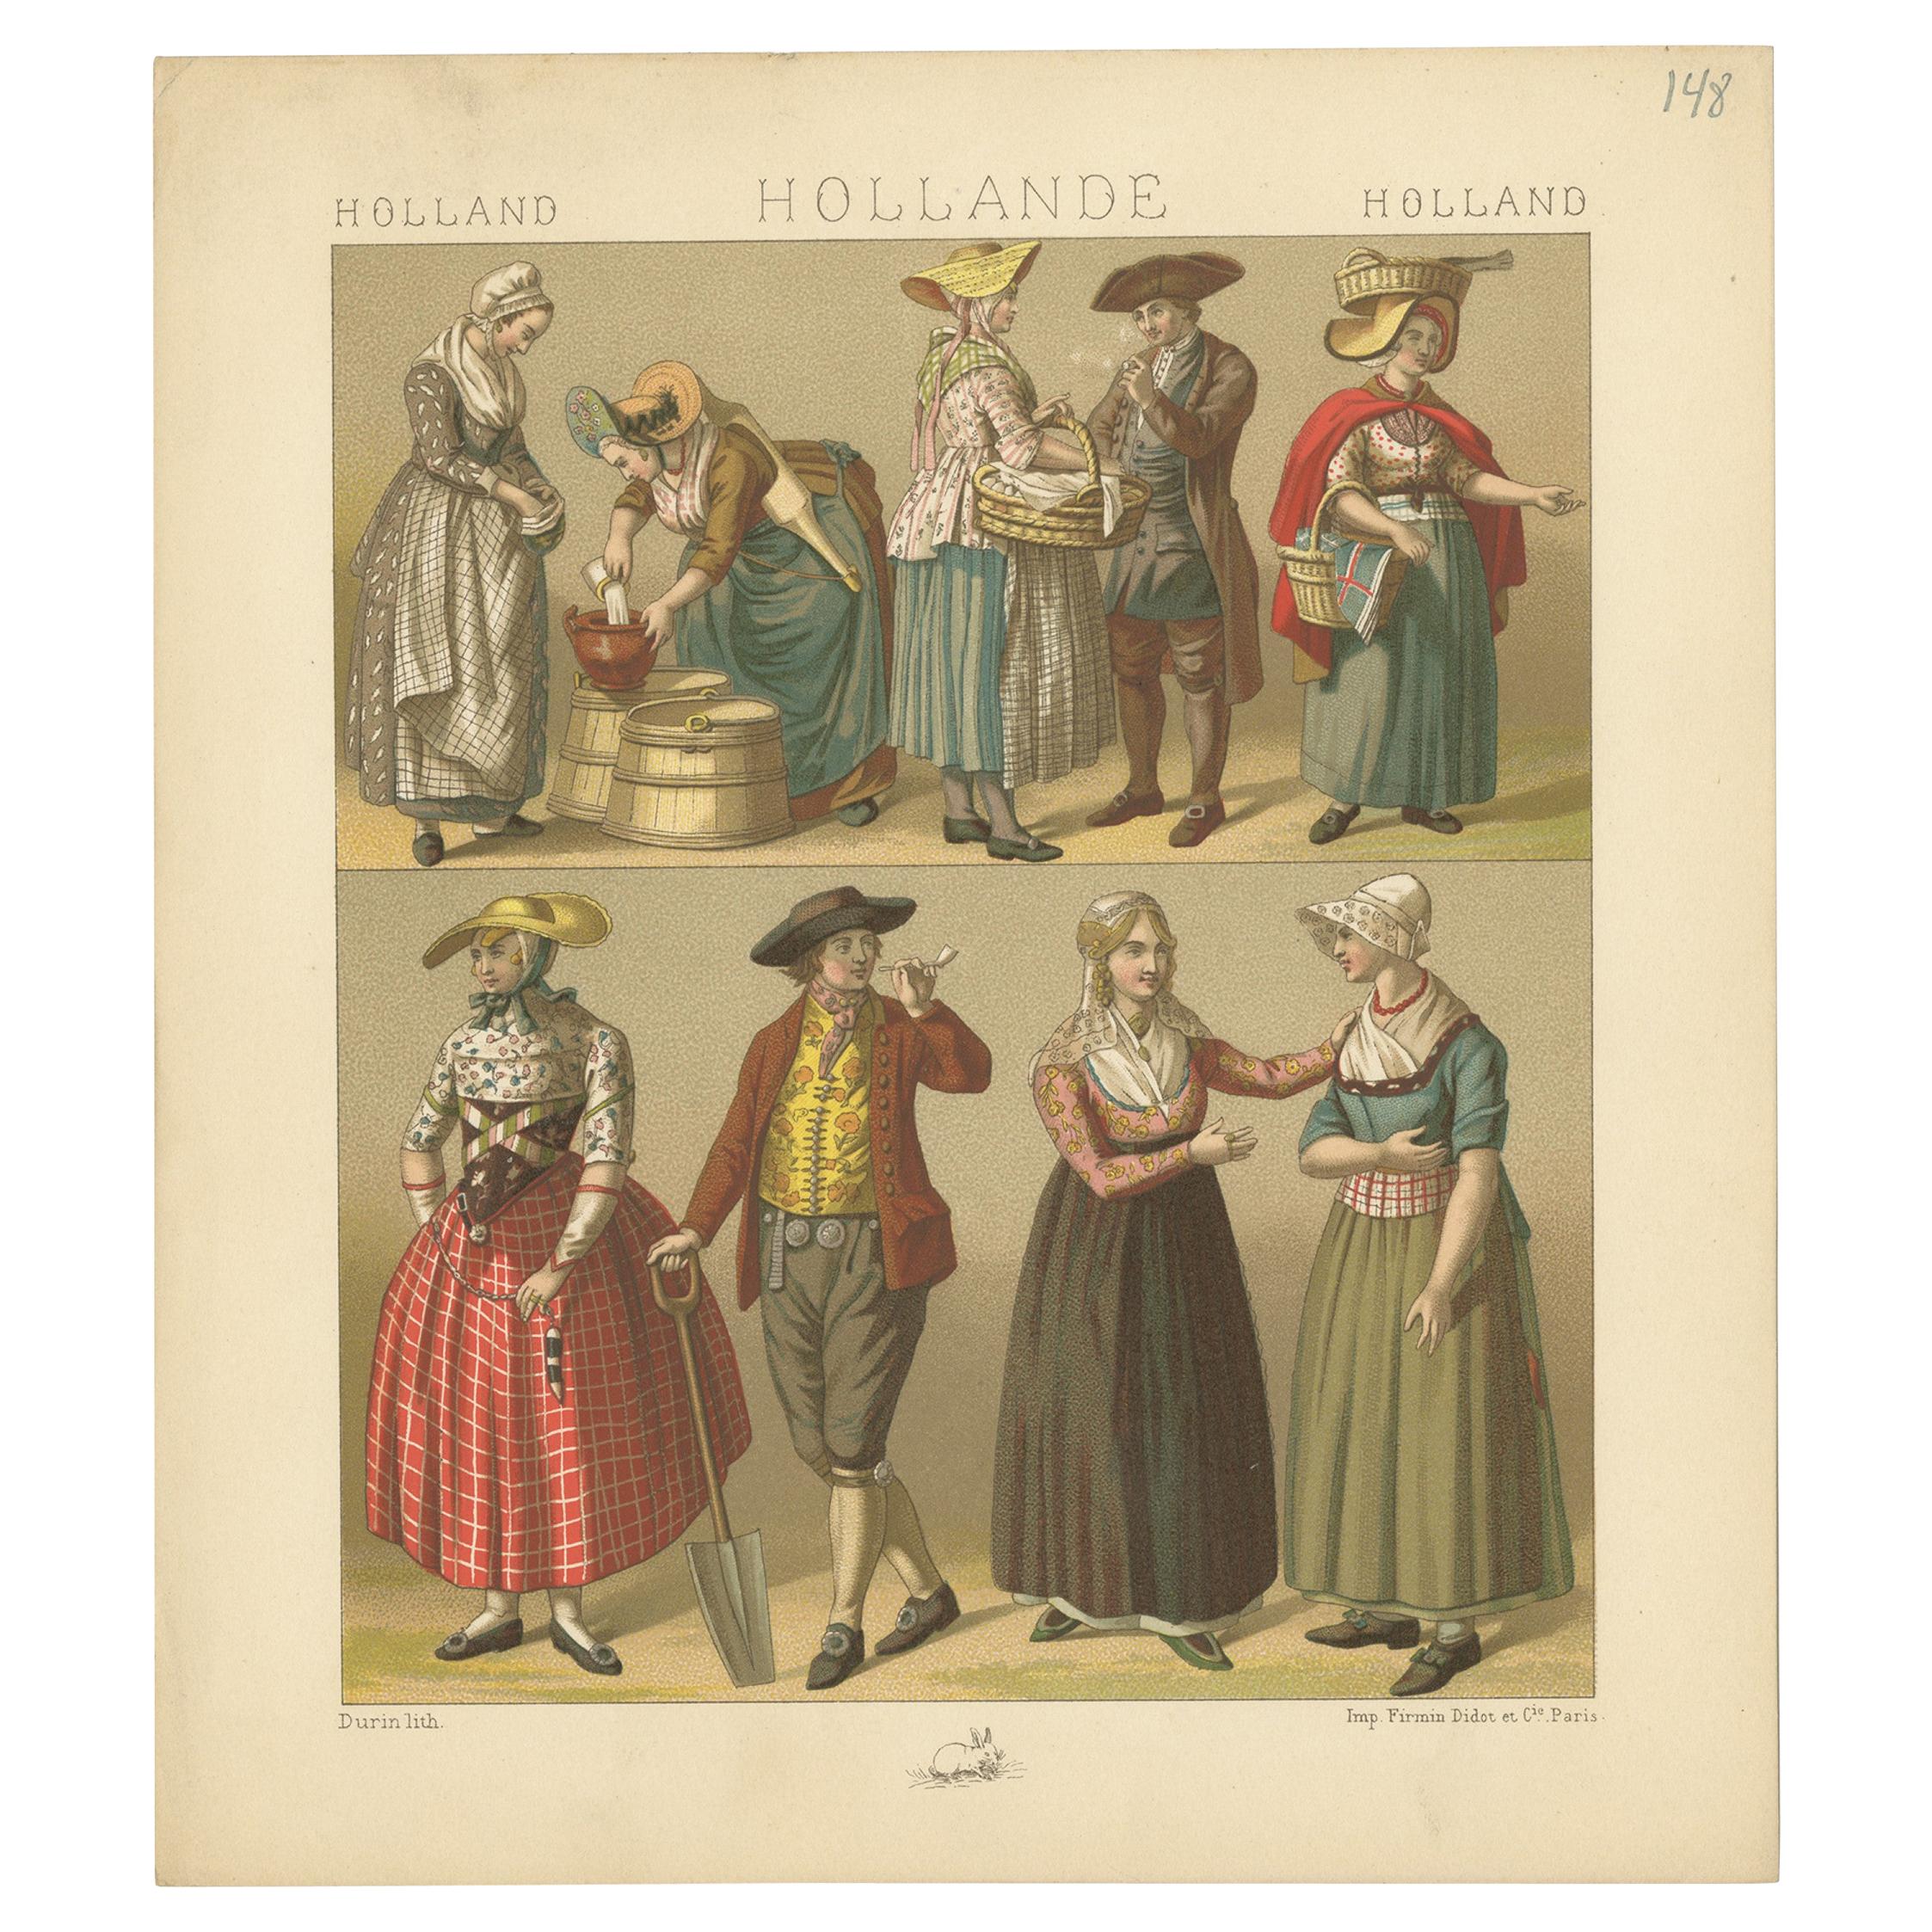 Pl. 148 Antique Print of Holland Outfits by Racinet, 'circa 1880'